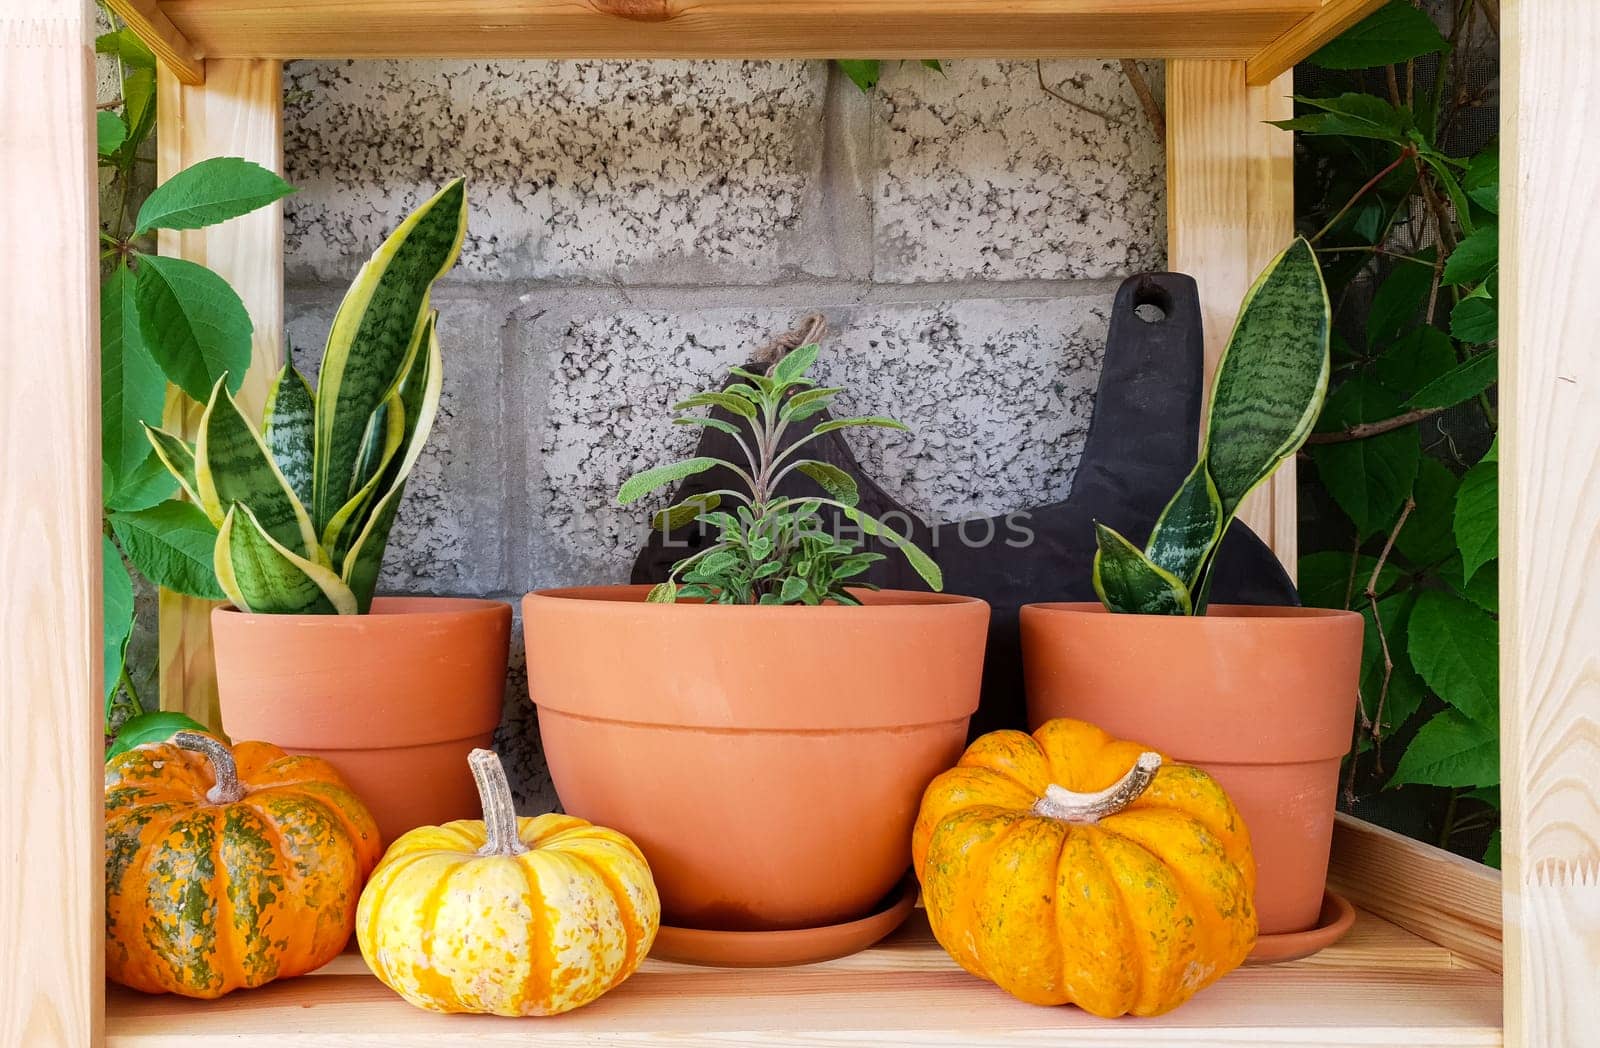 On a wooden shelf in clay pots there are green houseplants and yellow decorative pumpkins by Spirina